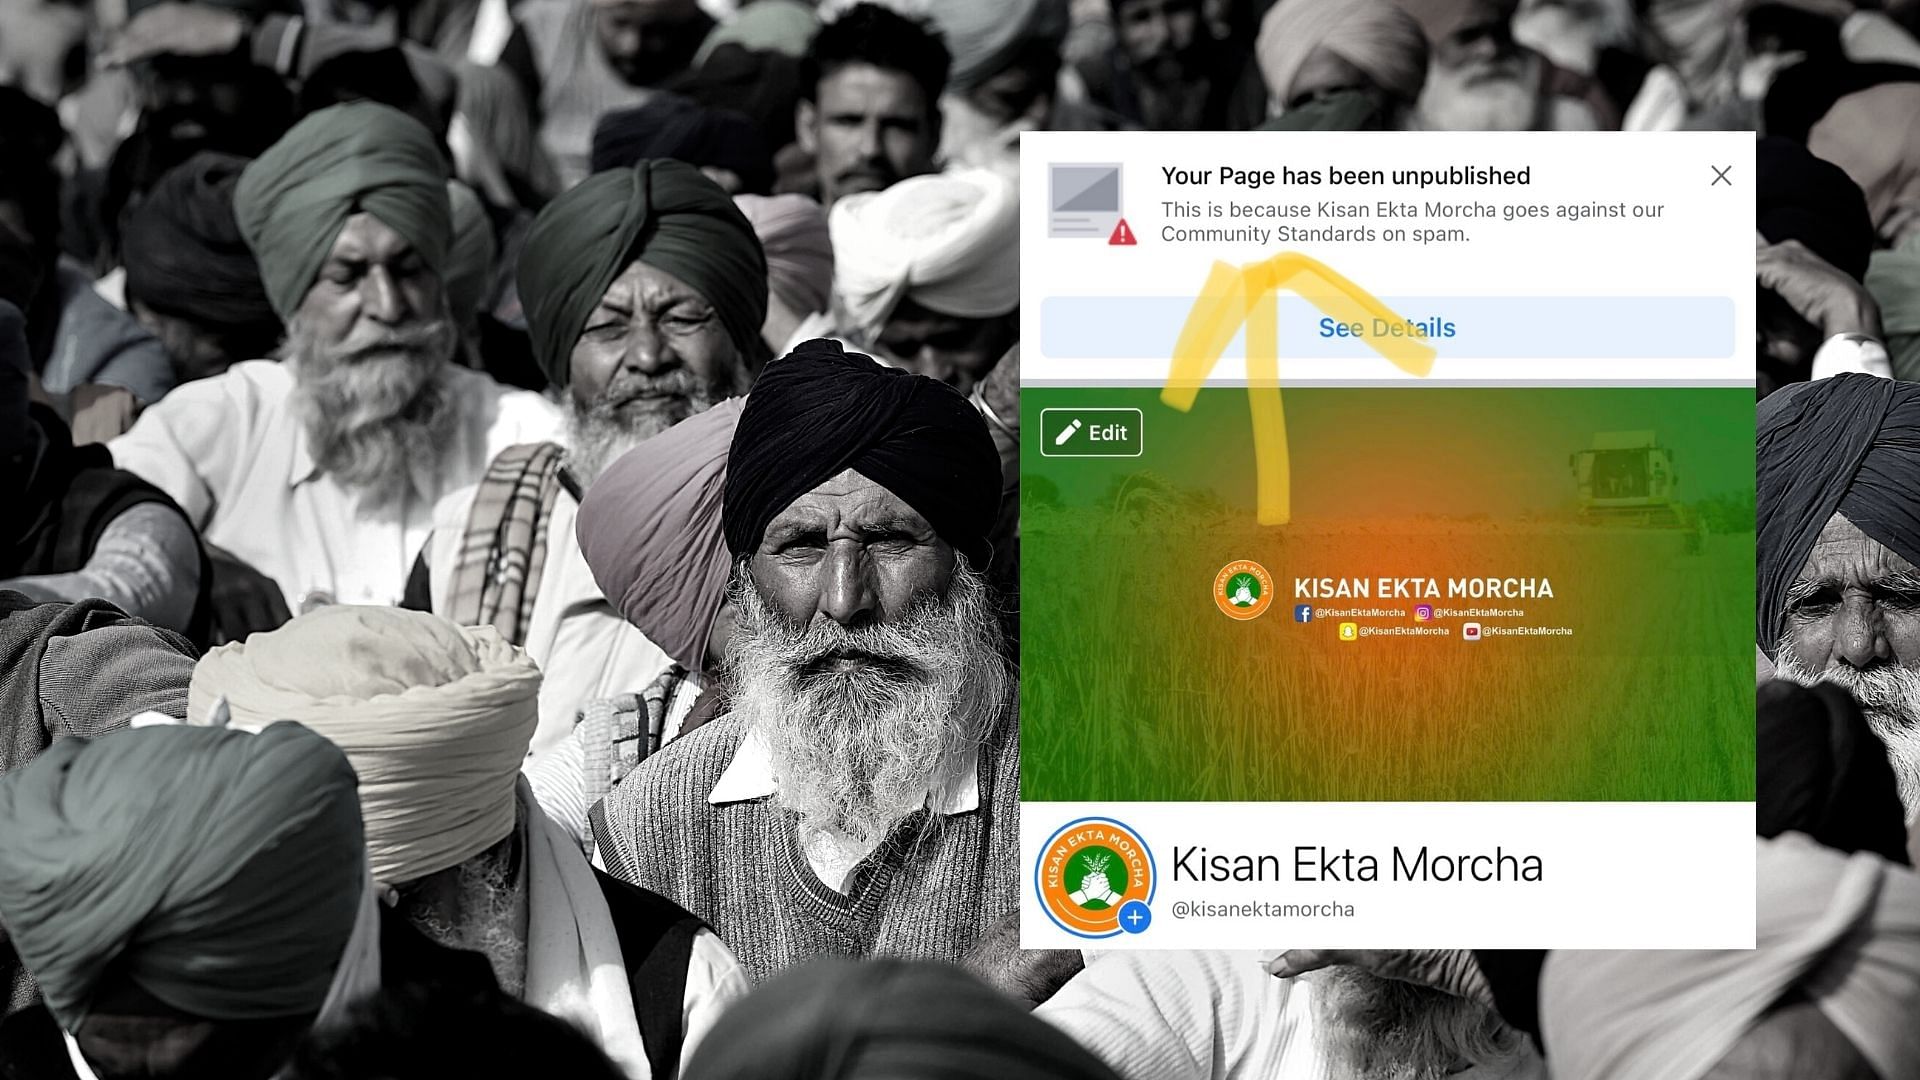 The Facebook page of Kisan Ekta Morcha that was being used by the farmers who are <a href="https://www.thequint.com/topic/farmers-protest">protesting</a> against the contentious farm laws, was blocked on Sunday, 20 December, as alleged by the protesters.